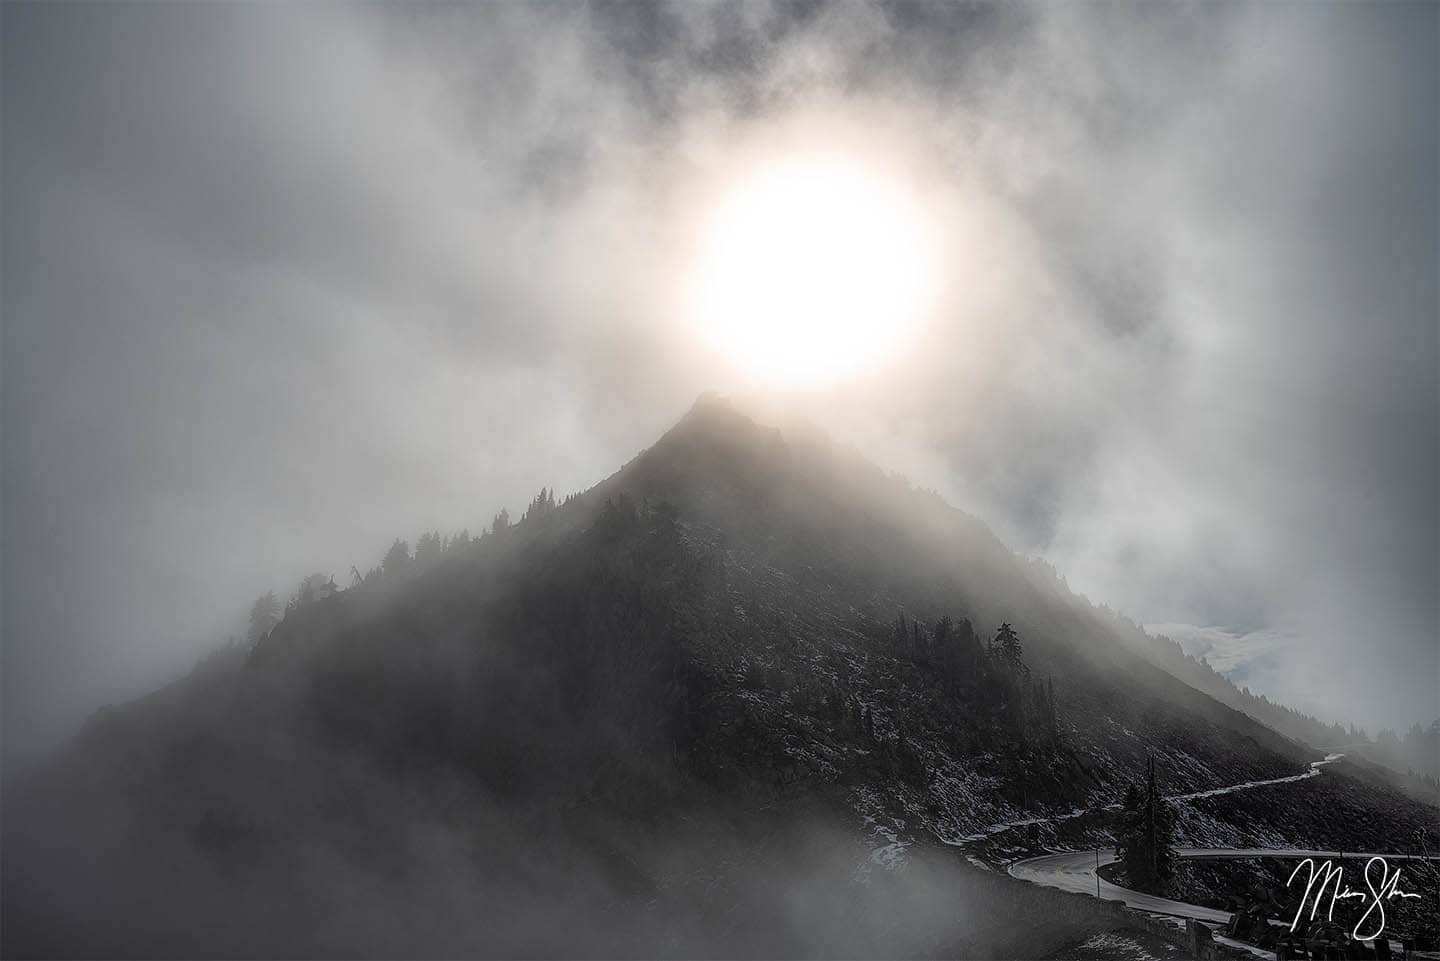 The Ethereal Watchman at Crater Lake National Park shrouded in fog and mist.